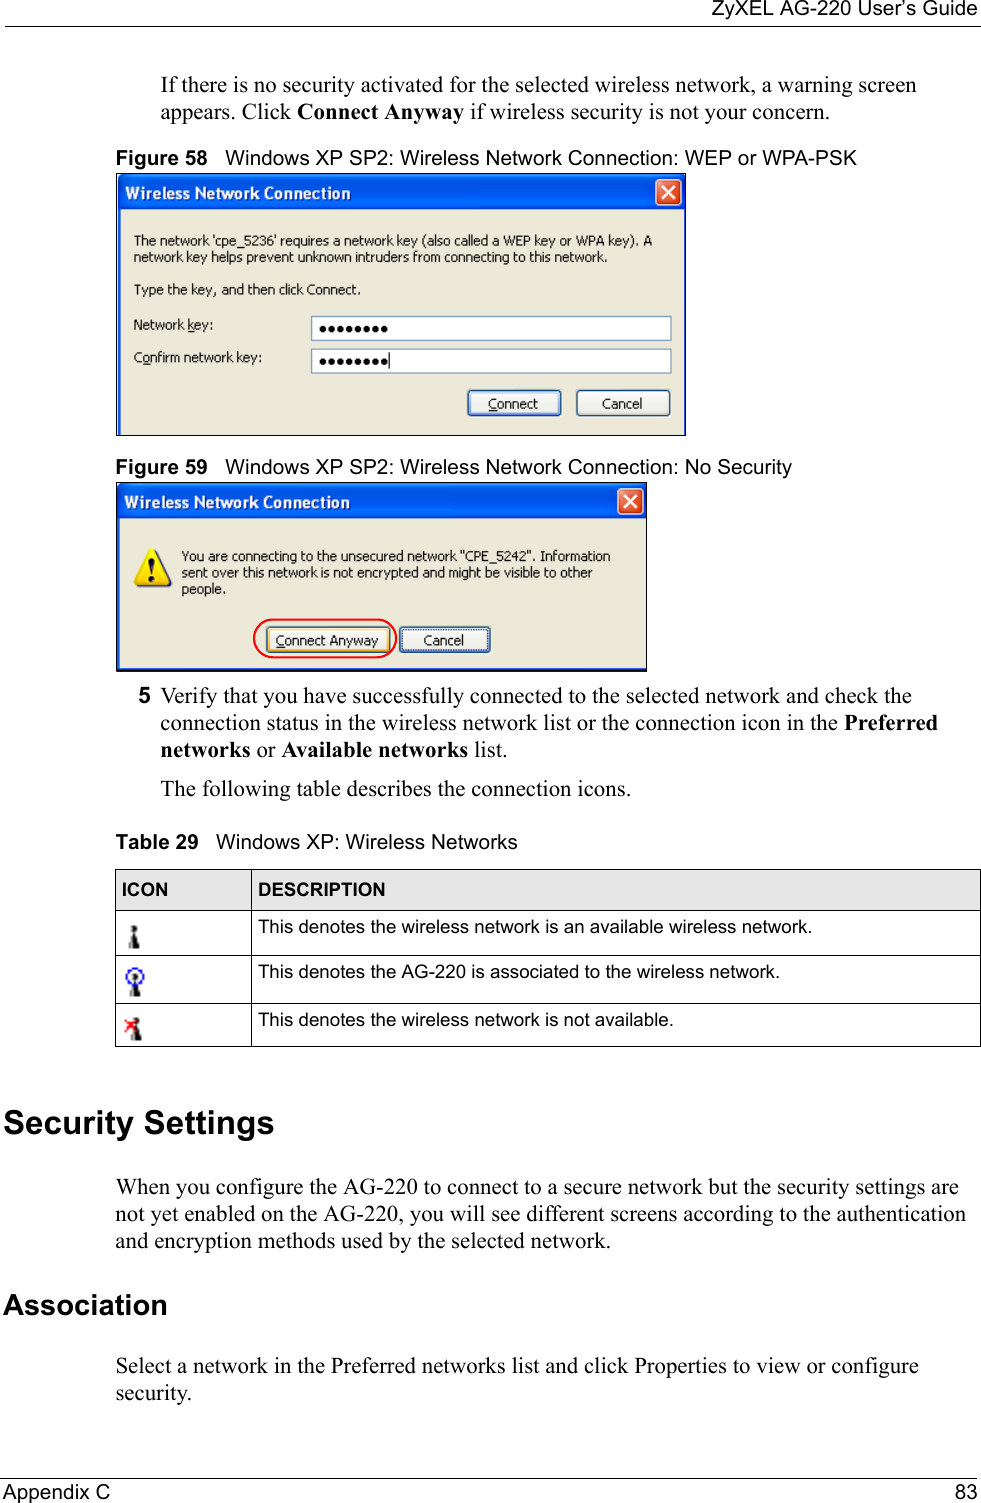 ZyXEL AG-220 User’s GuideAppendix C 83If there is no security activated for the selected wireless network, a warning screen appears. Click Connect Anyway if wireless security is not your concern.Figure 58   Windows XP SP2: Wireless Network Connection: WEP or WPA-PSKFigure 59   Windows XP SP2: Wireless Network Connection: No Security5Verify that you have successfully connected to the selected network and check the connection status in the wireless network list or the connection icon in the Preferred networks or Available networks list.The following table describes the connection icons.Security SettingsWhen you configure the AG-220 to connect to a secure network but the security settings are not yet enabled on the AG-220, you will see different screens according to the authentication and encryption methods used by the selected network.AssociationSelect a network in the Preferred networks list and click Properties to view or configure security.Table 29   Windows XP: Wireless NetworksICON DESCRIPTIONThis denotes the wireless network is an available wireless network.This denotes the AG-220 is associated to the wireless network.This denotes the wireless network is not available.